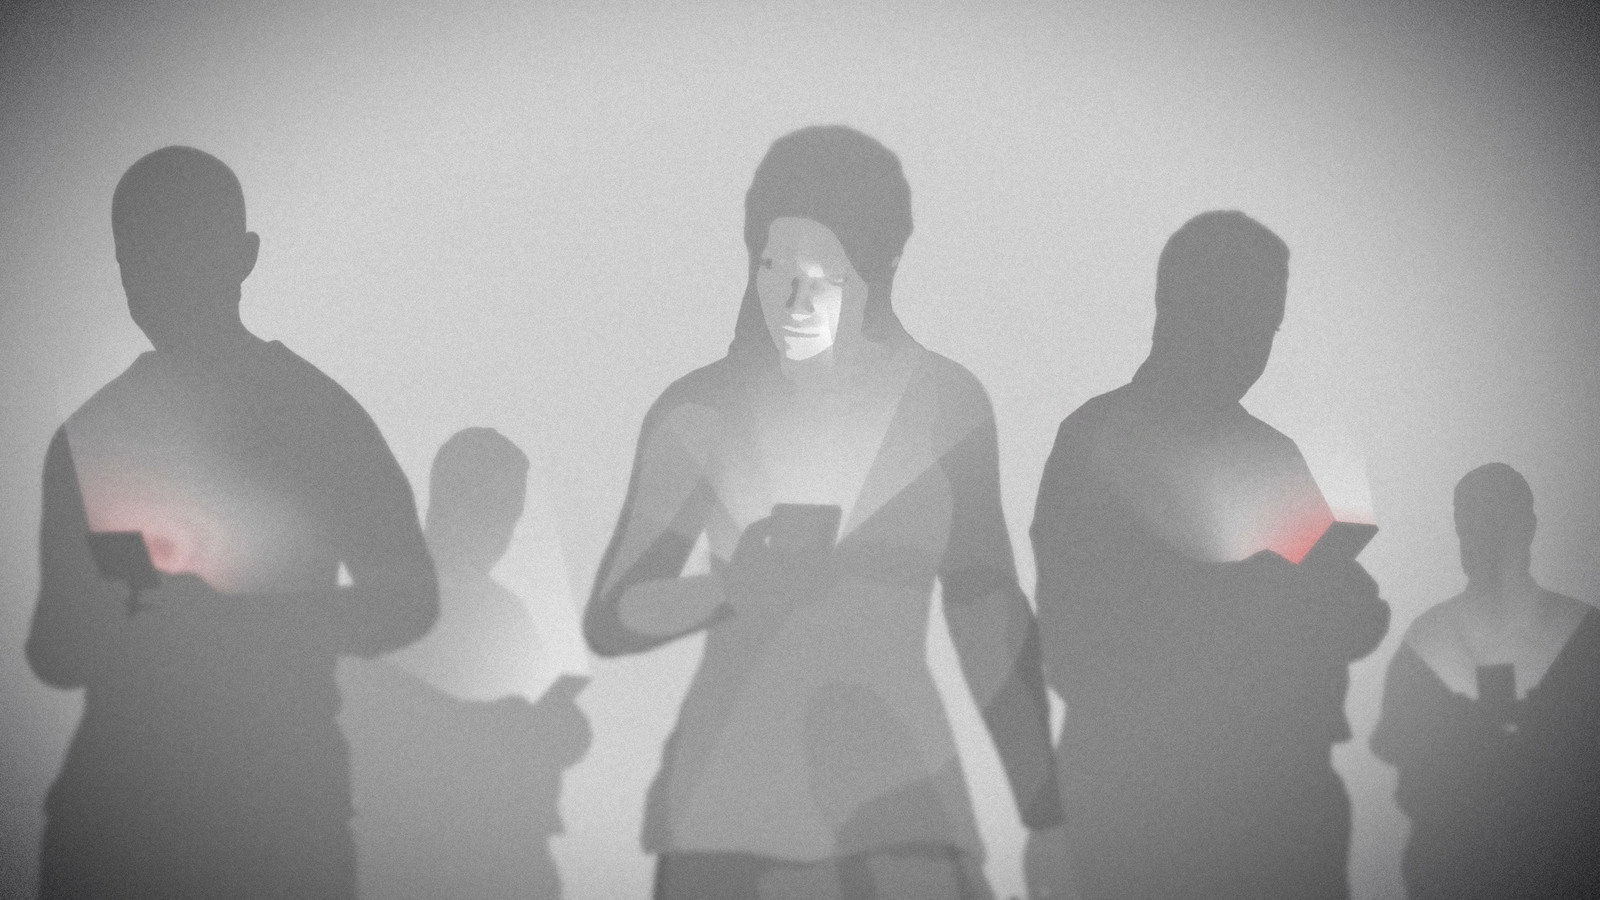 Still from "Democracy Project" animation.